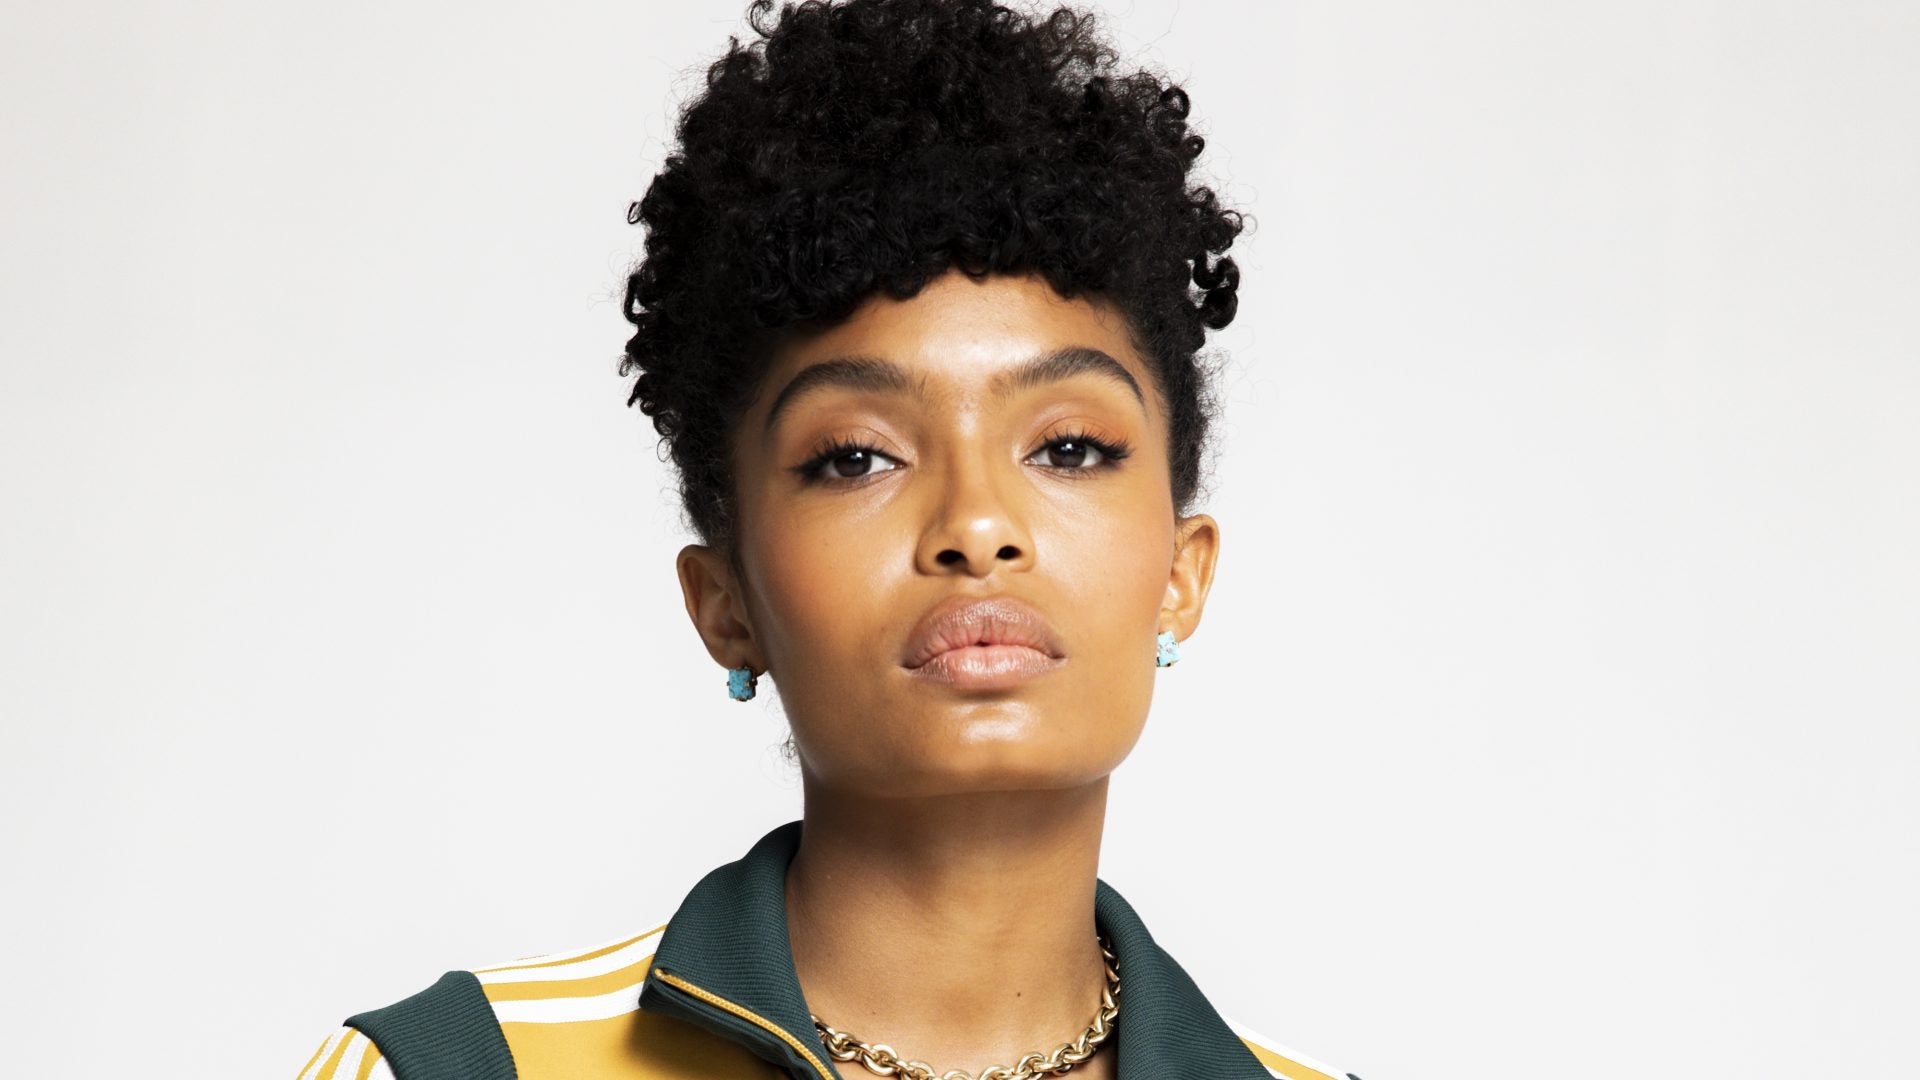 Yara Shahidi Explores Her Heritage With New Adidas Collection